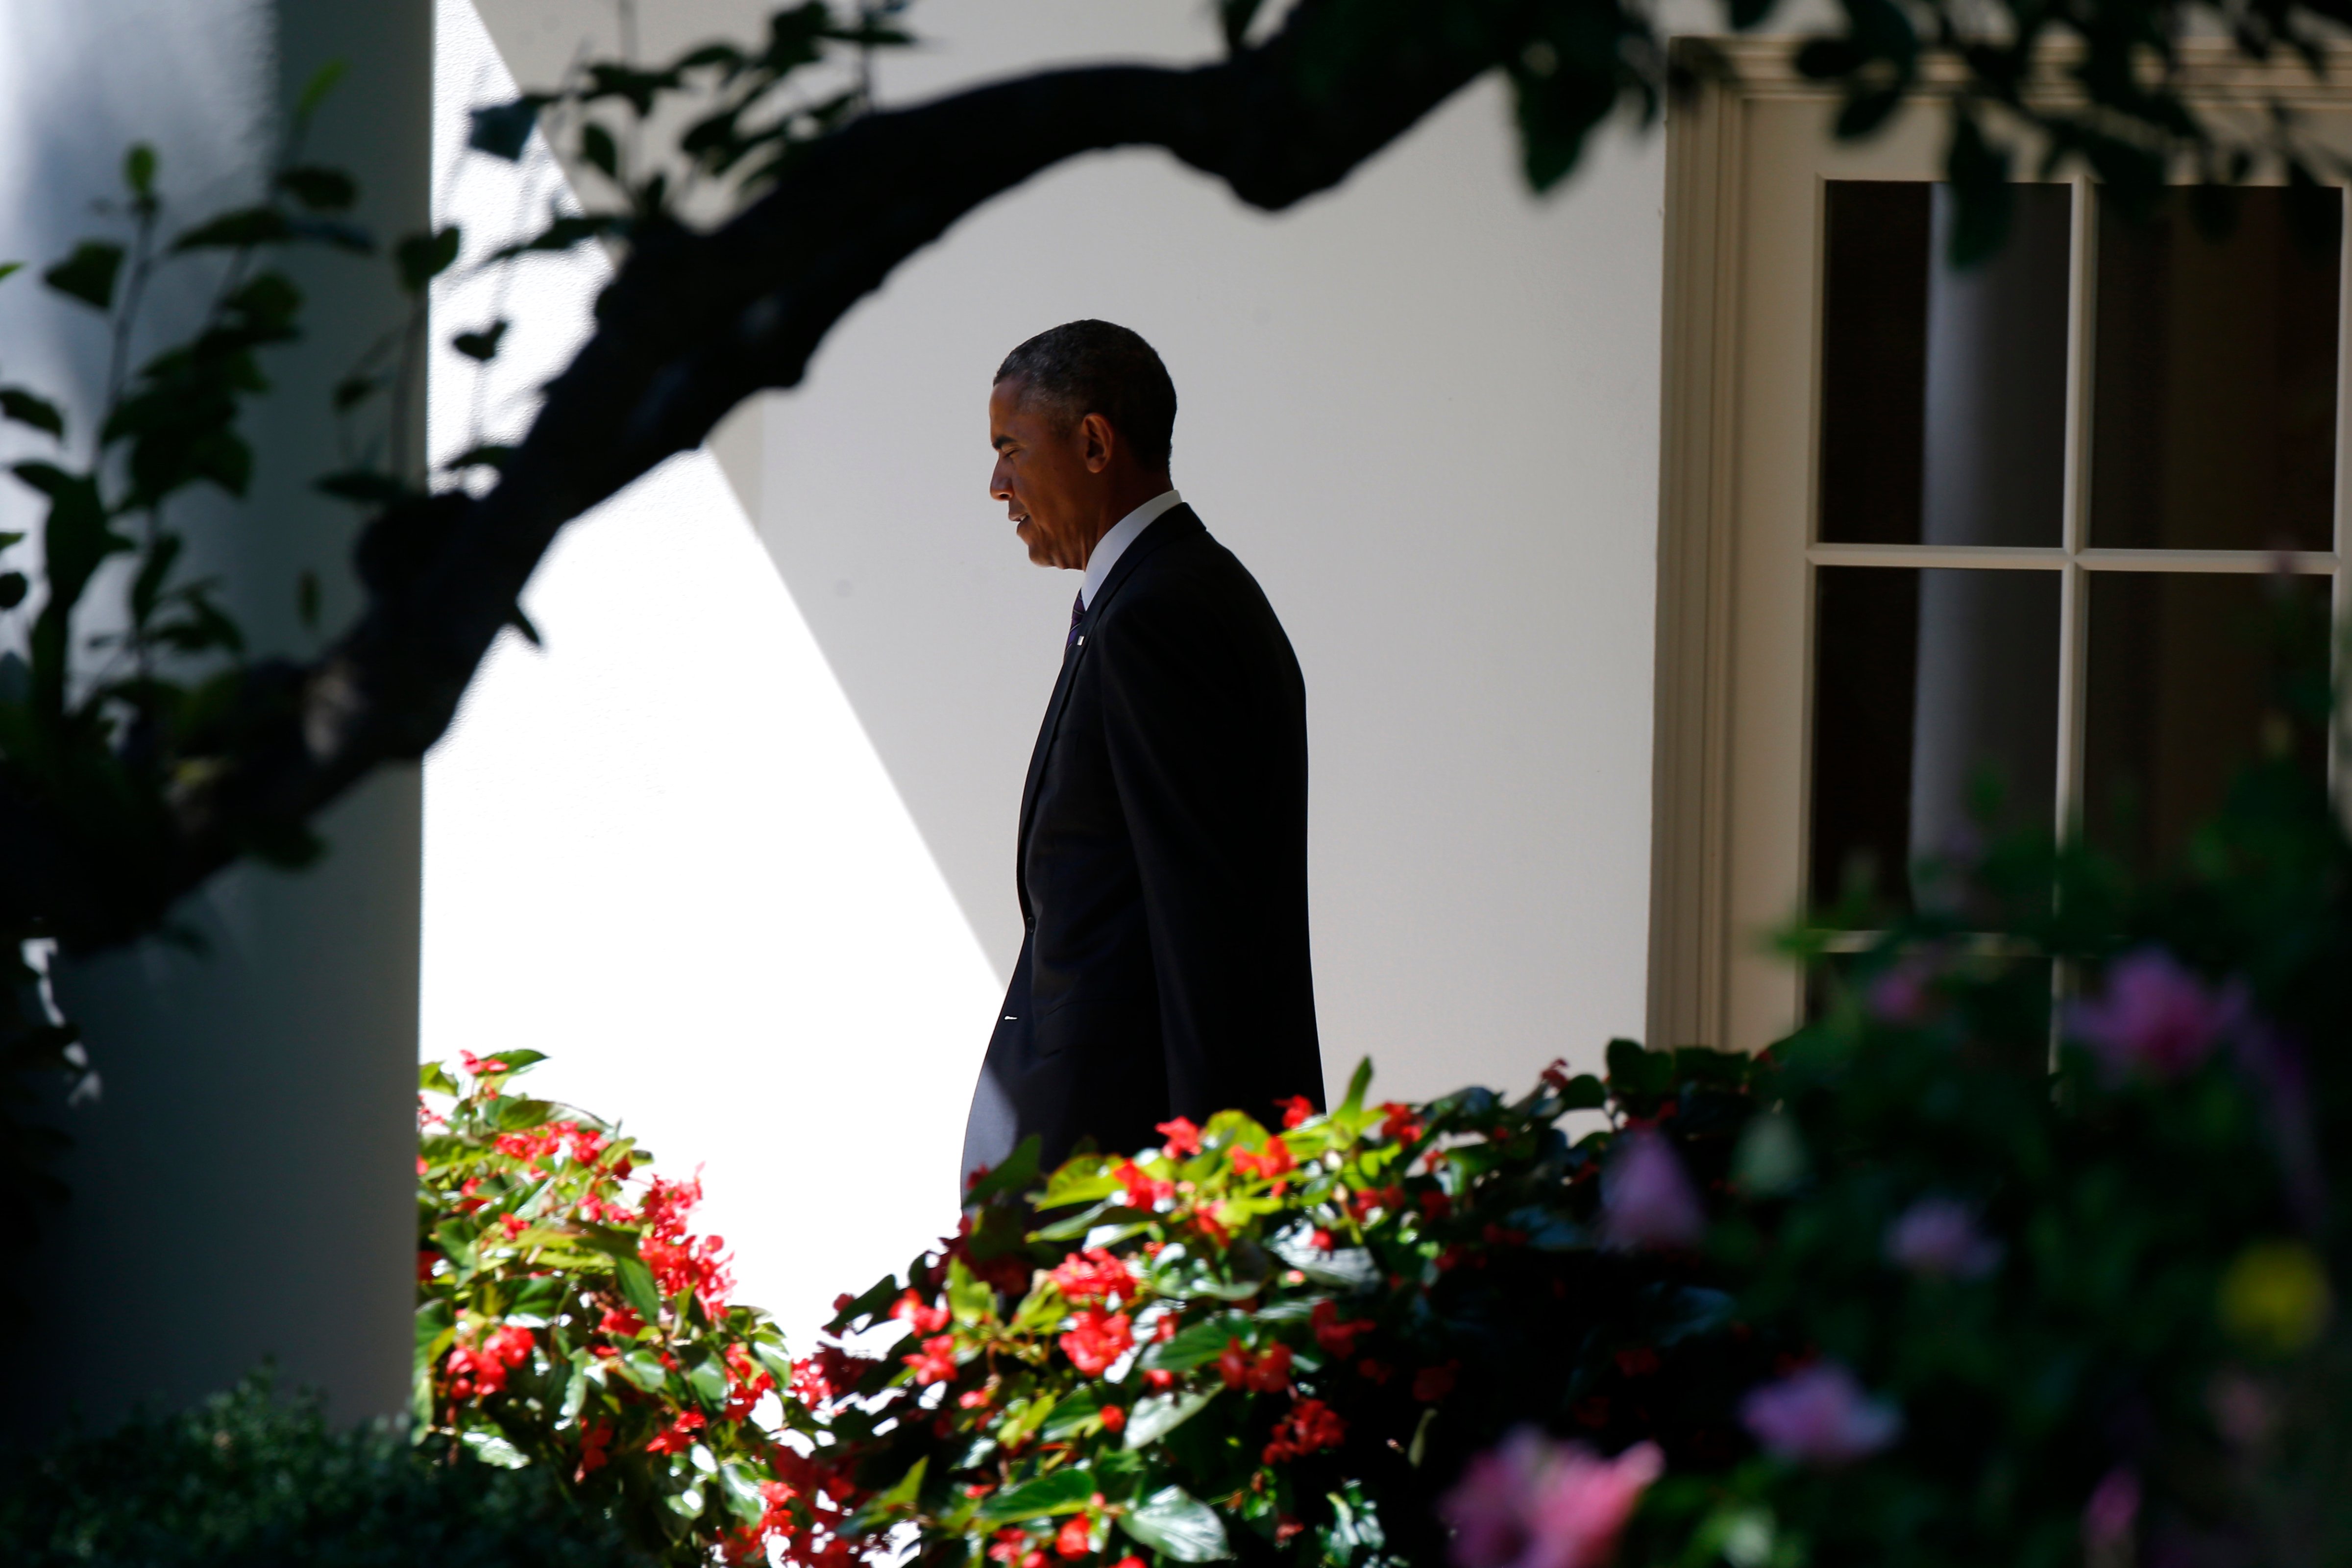 President Barack Obama walks out of the Oval Office towards the South Lawn of the White House in Washington, on Aug. 29, 2014. (Charles Dharapak—AP)